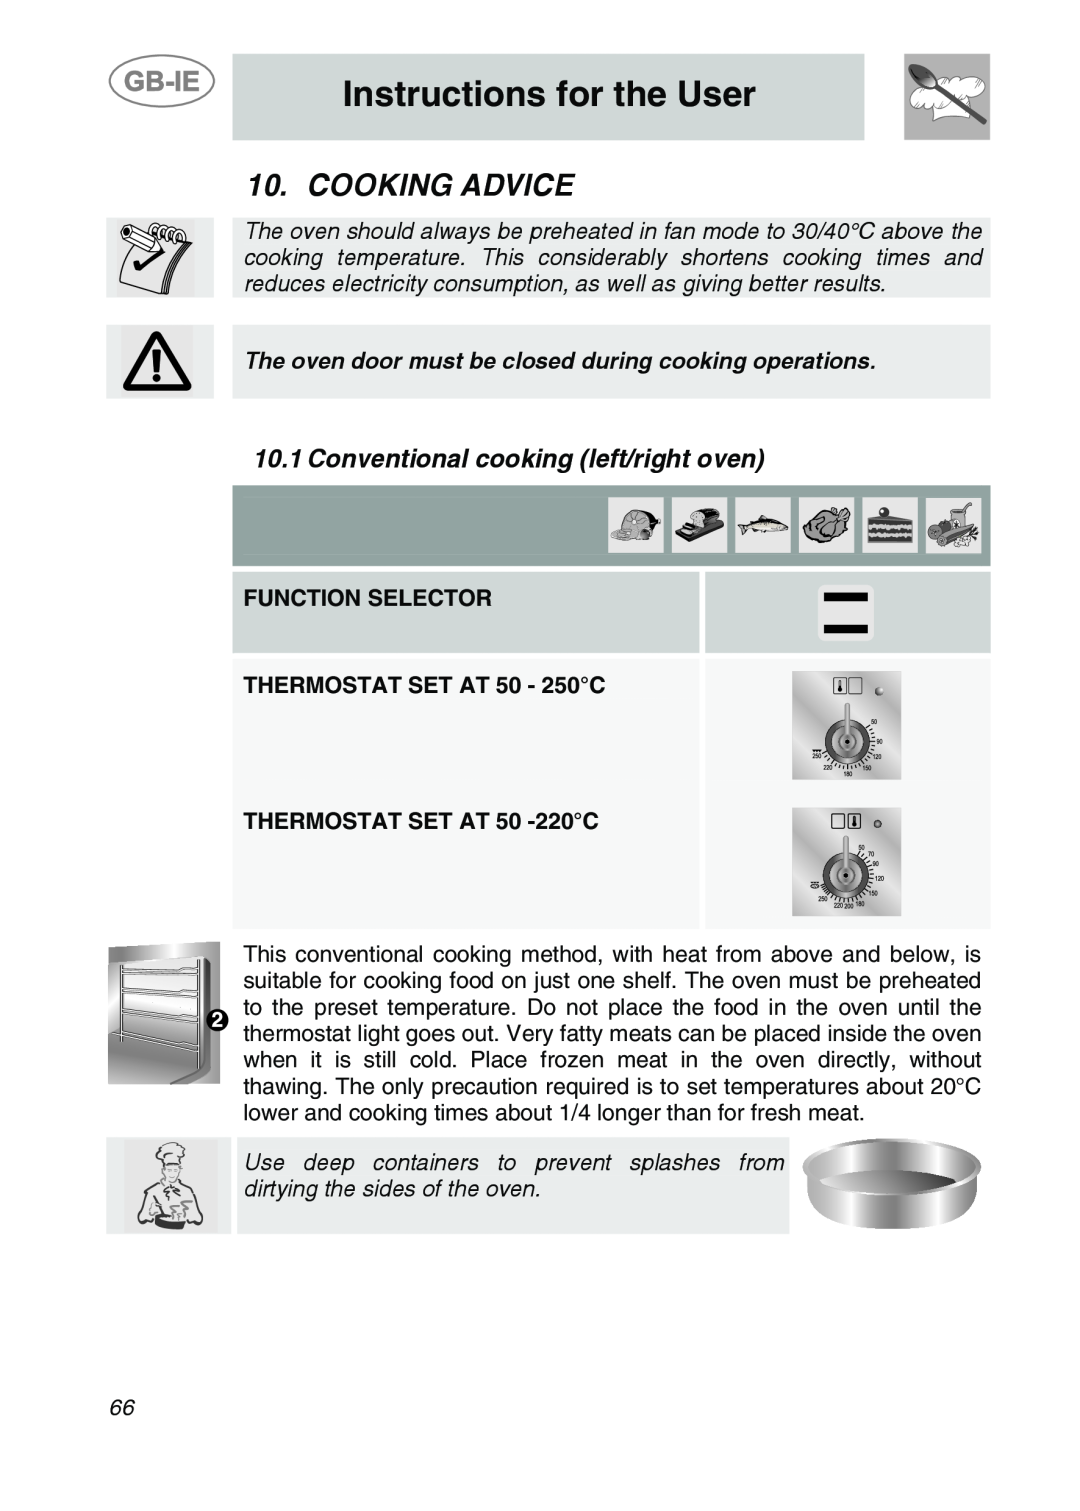 Smeg CS122-6 manual Cooking Advice, Conventional cooking left/right oven, FUNCTION SELECTOR THERMOSTAT SET AT 50 - 250C 